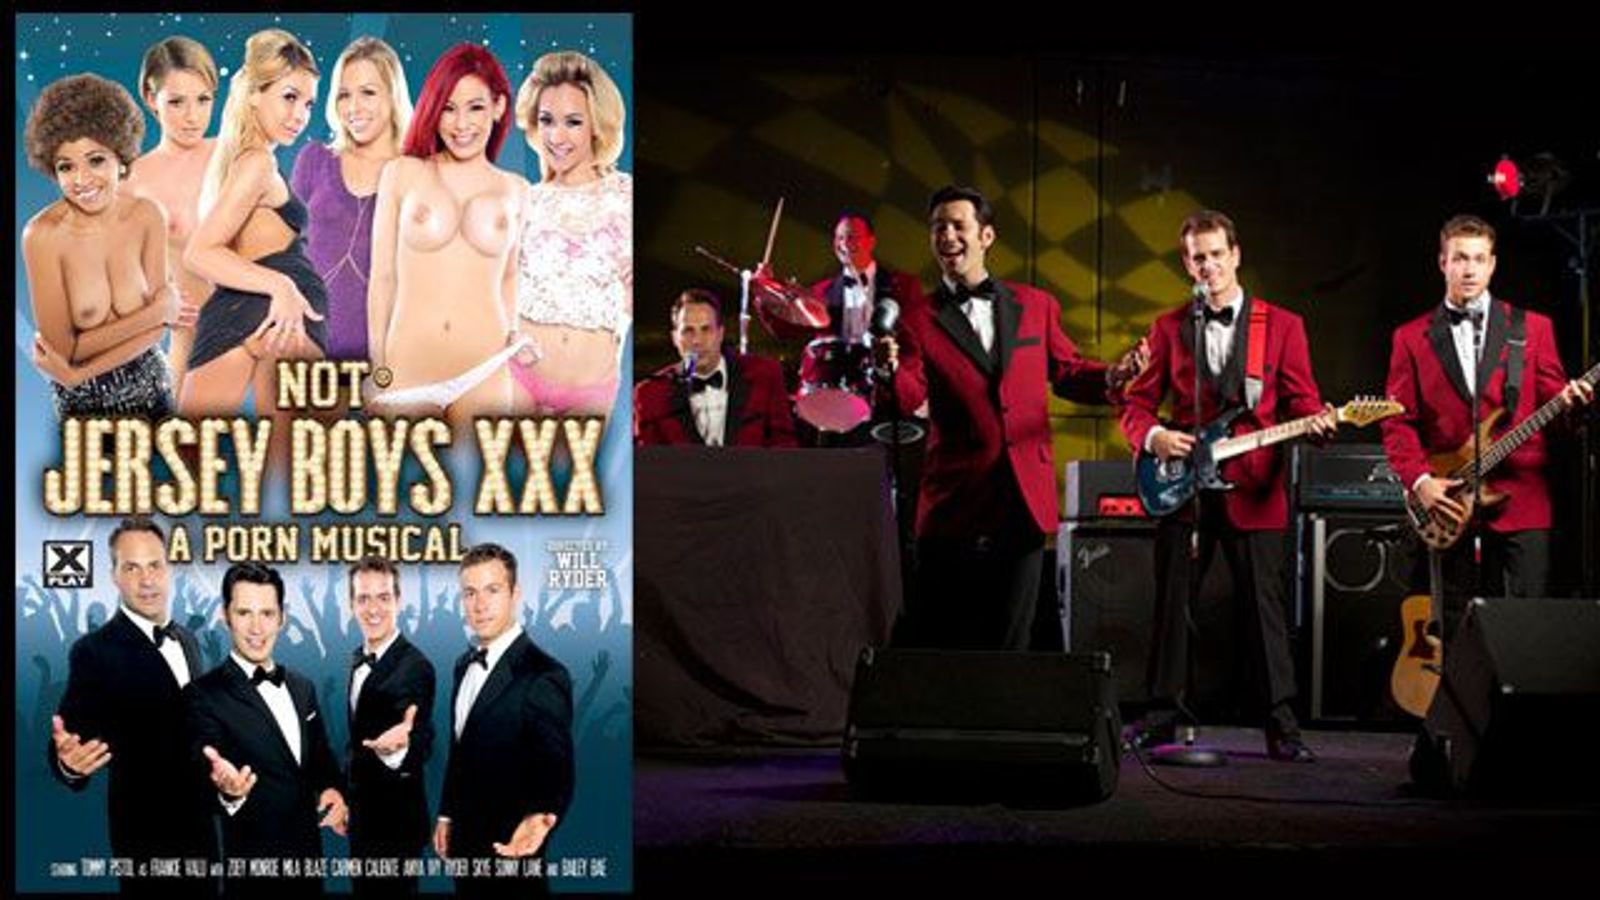 HBO Airing Helps Propel 'Jersey Boys XXX' Sales